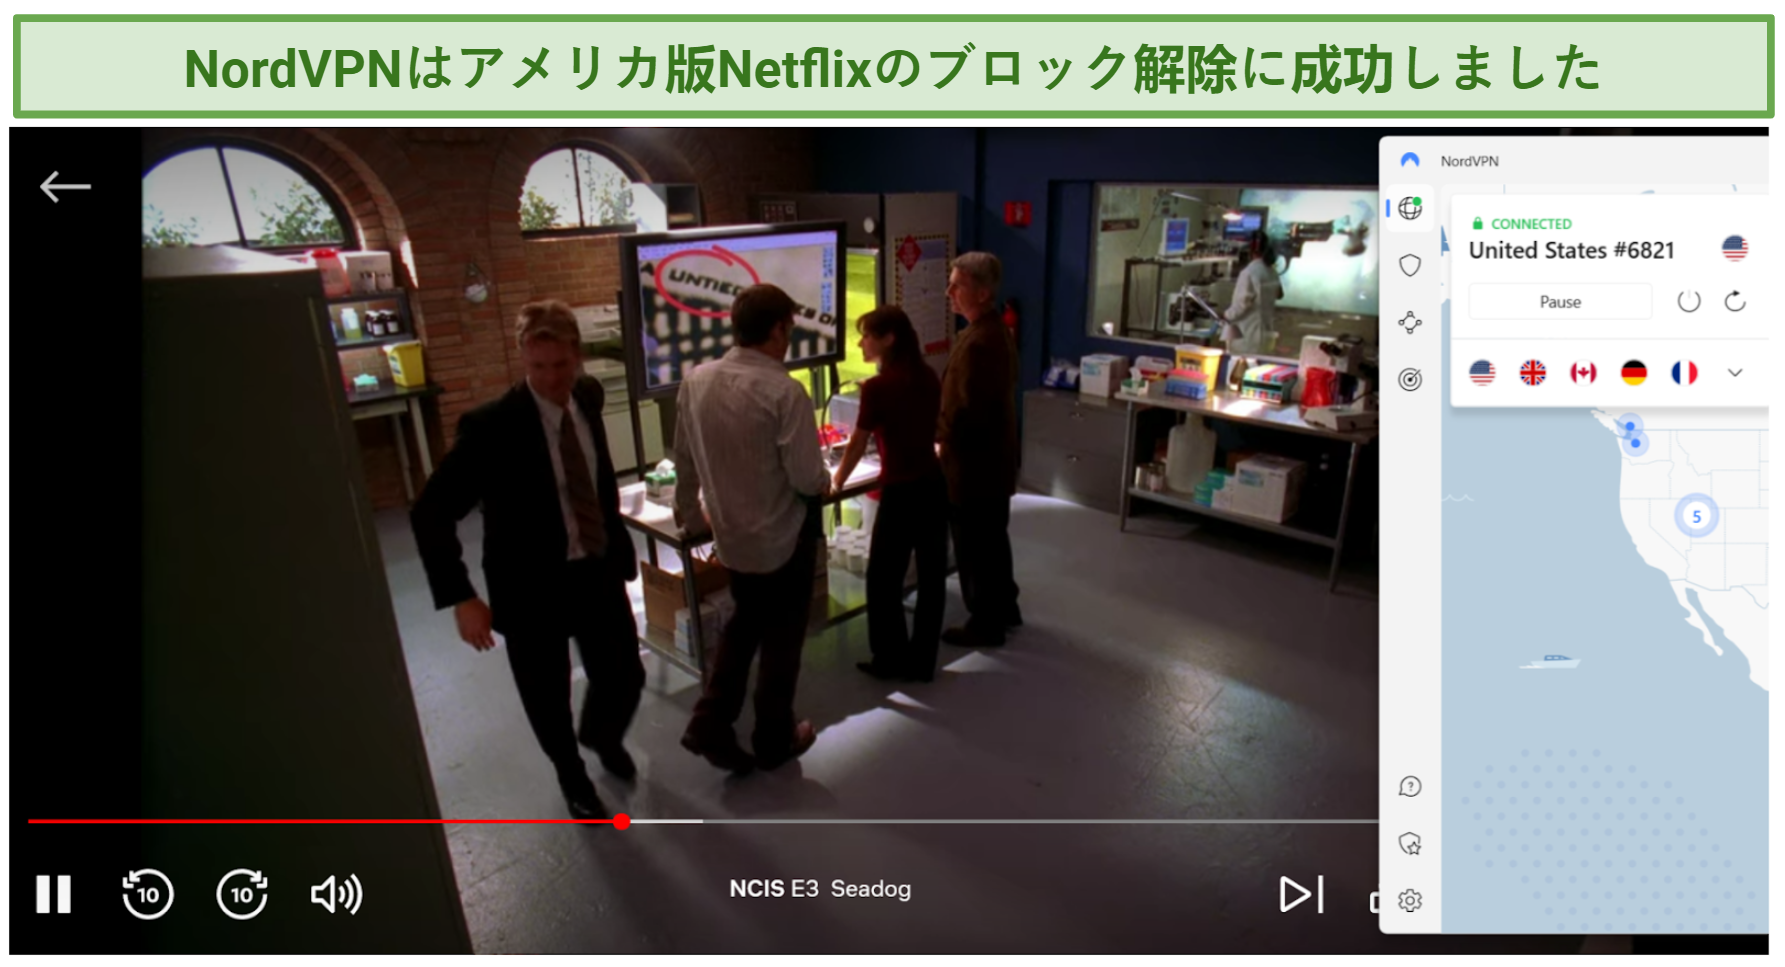 Screenshot of NordVPN streaming Netflix NCIS while connected to a US server